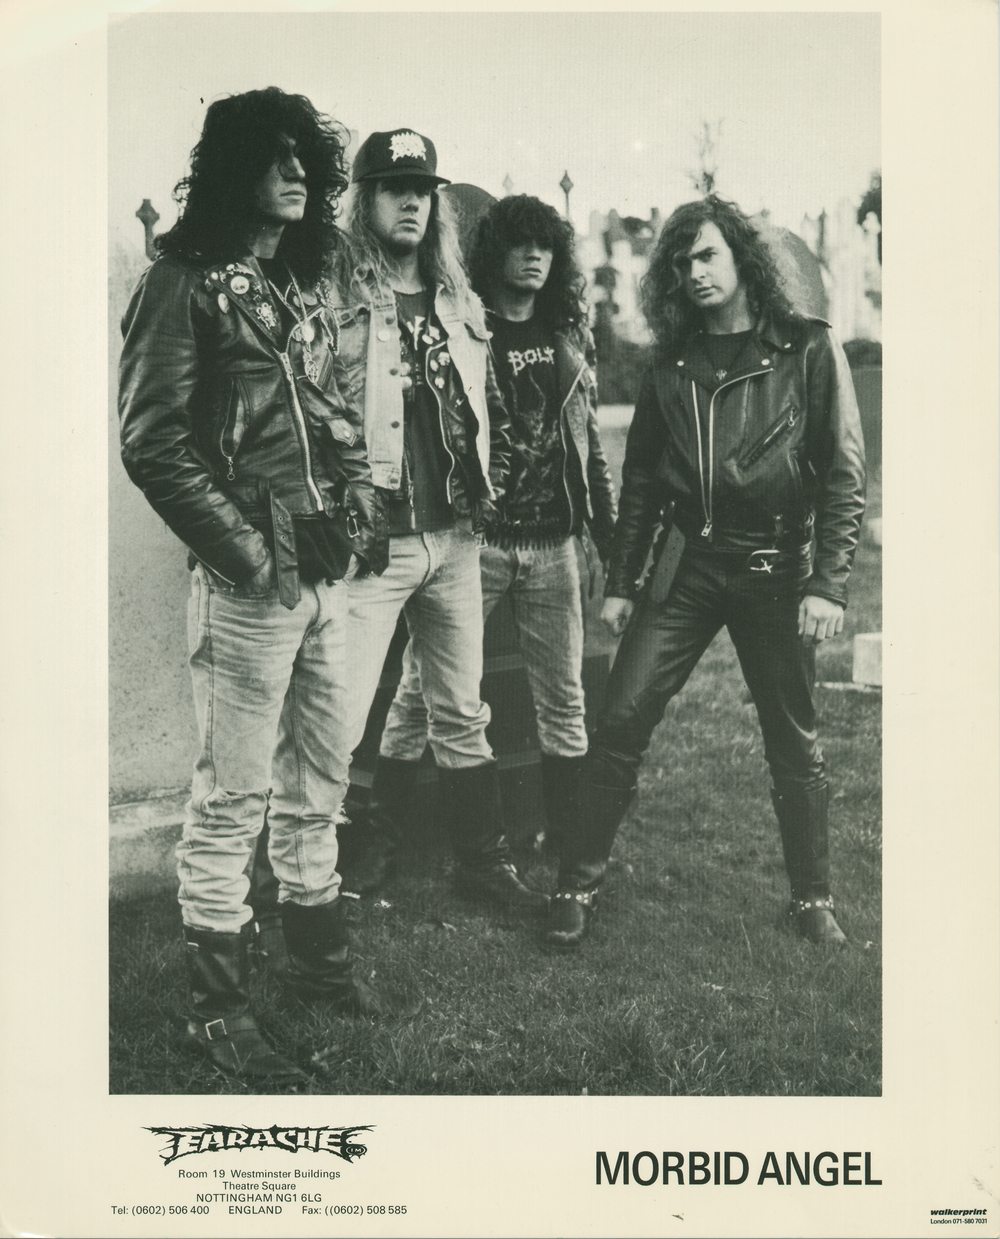 An early Morbid Angel promotional picture from Earache Records.